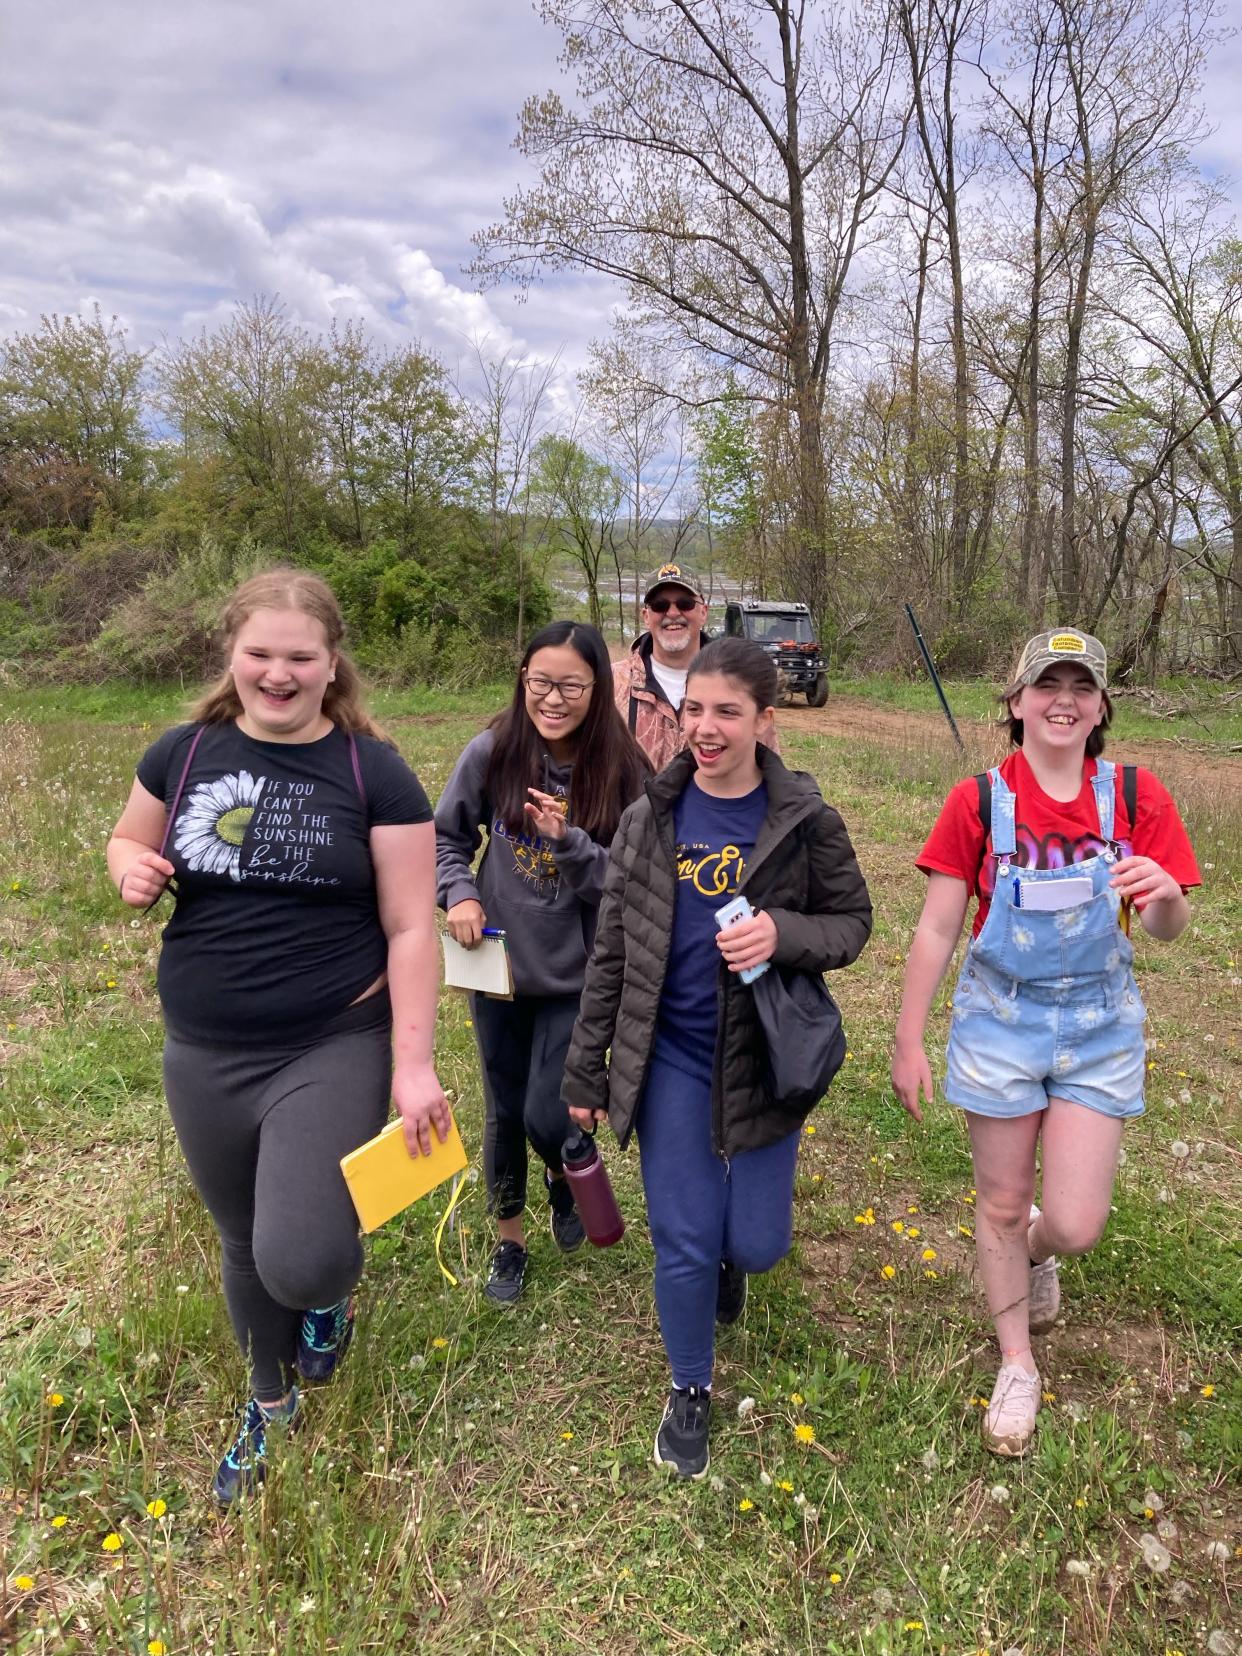 Wooster Edgewood Middle School seventh graders, from left, Allie Greenwald, Claire Jeon, Willow Fetty and Rae Phillips head out into a field at Killbuck Marsh Wildlife Area in search of a story under the guidance of Daily Record outdoor correspondent Art Holden, back.